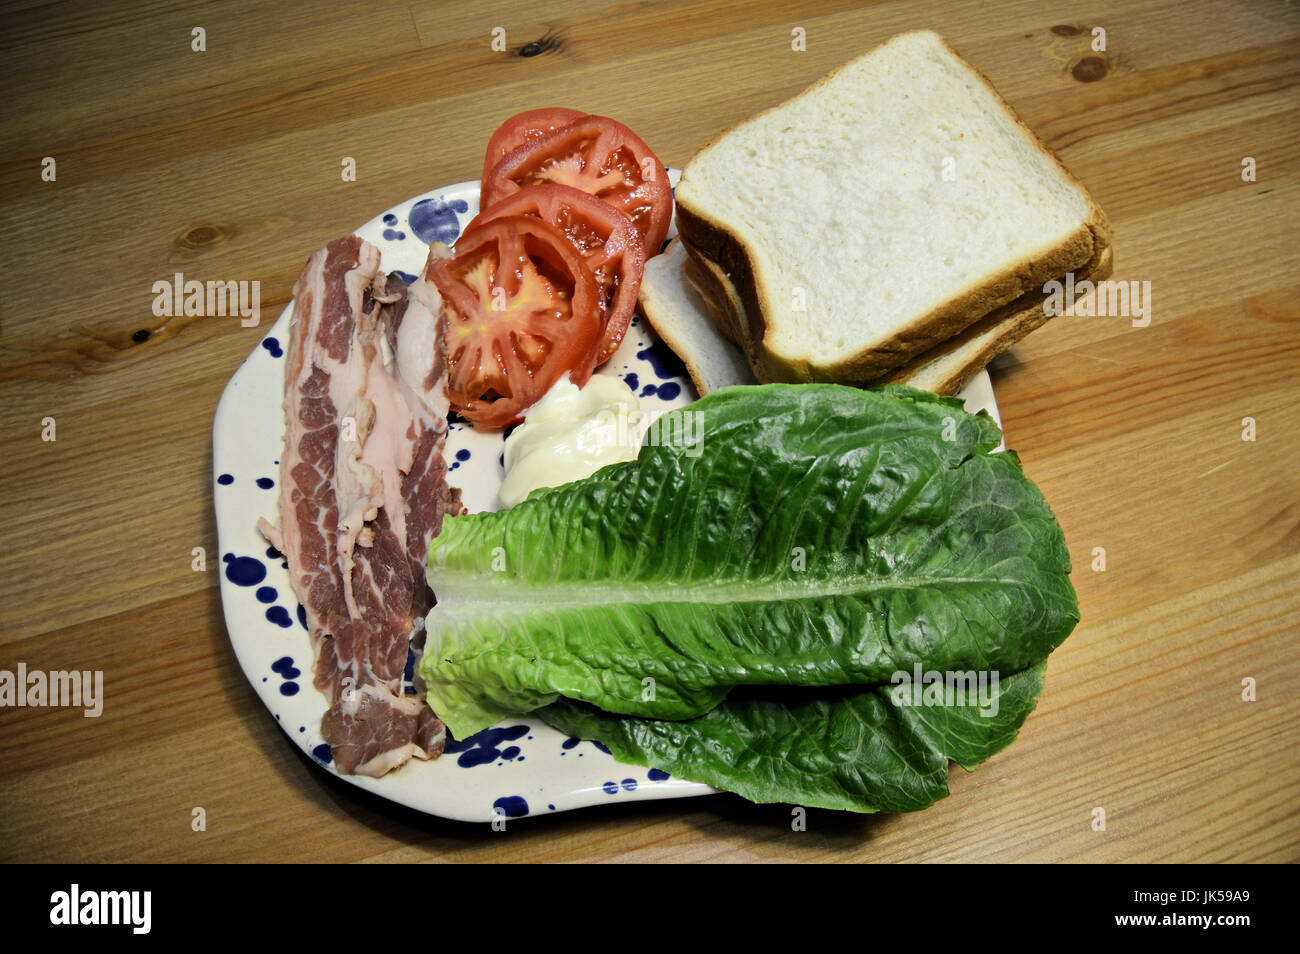 BLT ingredients bacon , lettuce and tomato Stock Photo